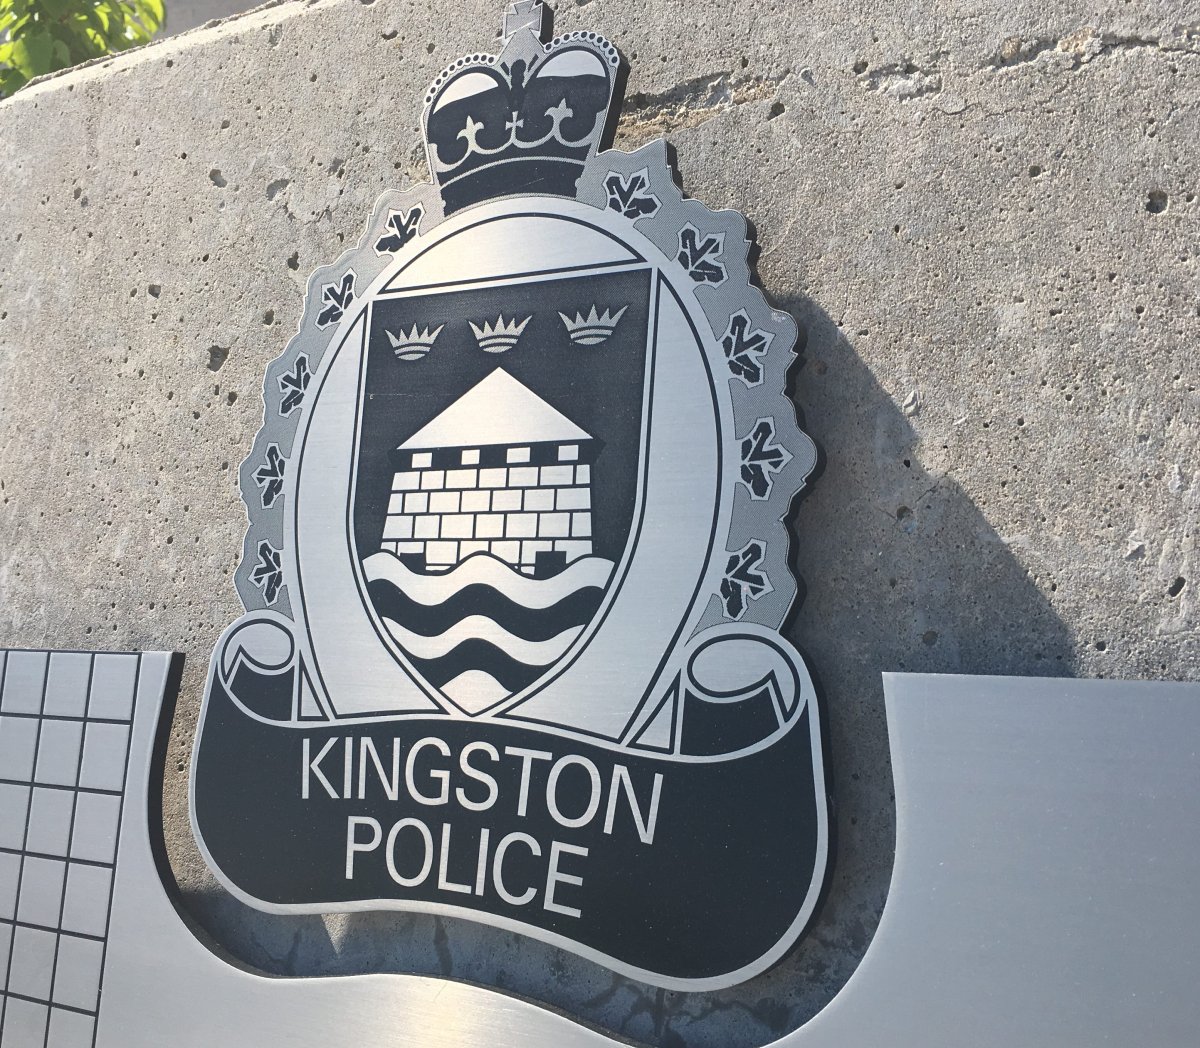 Kingston police say two people who were involved in several thefts turned themselves in on Thursday.